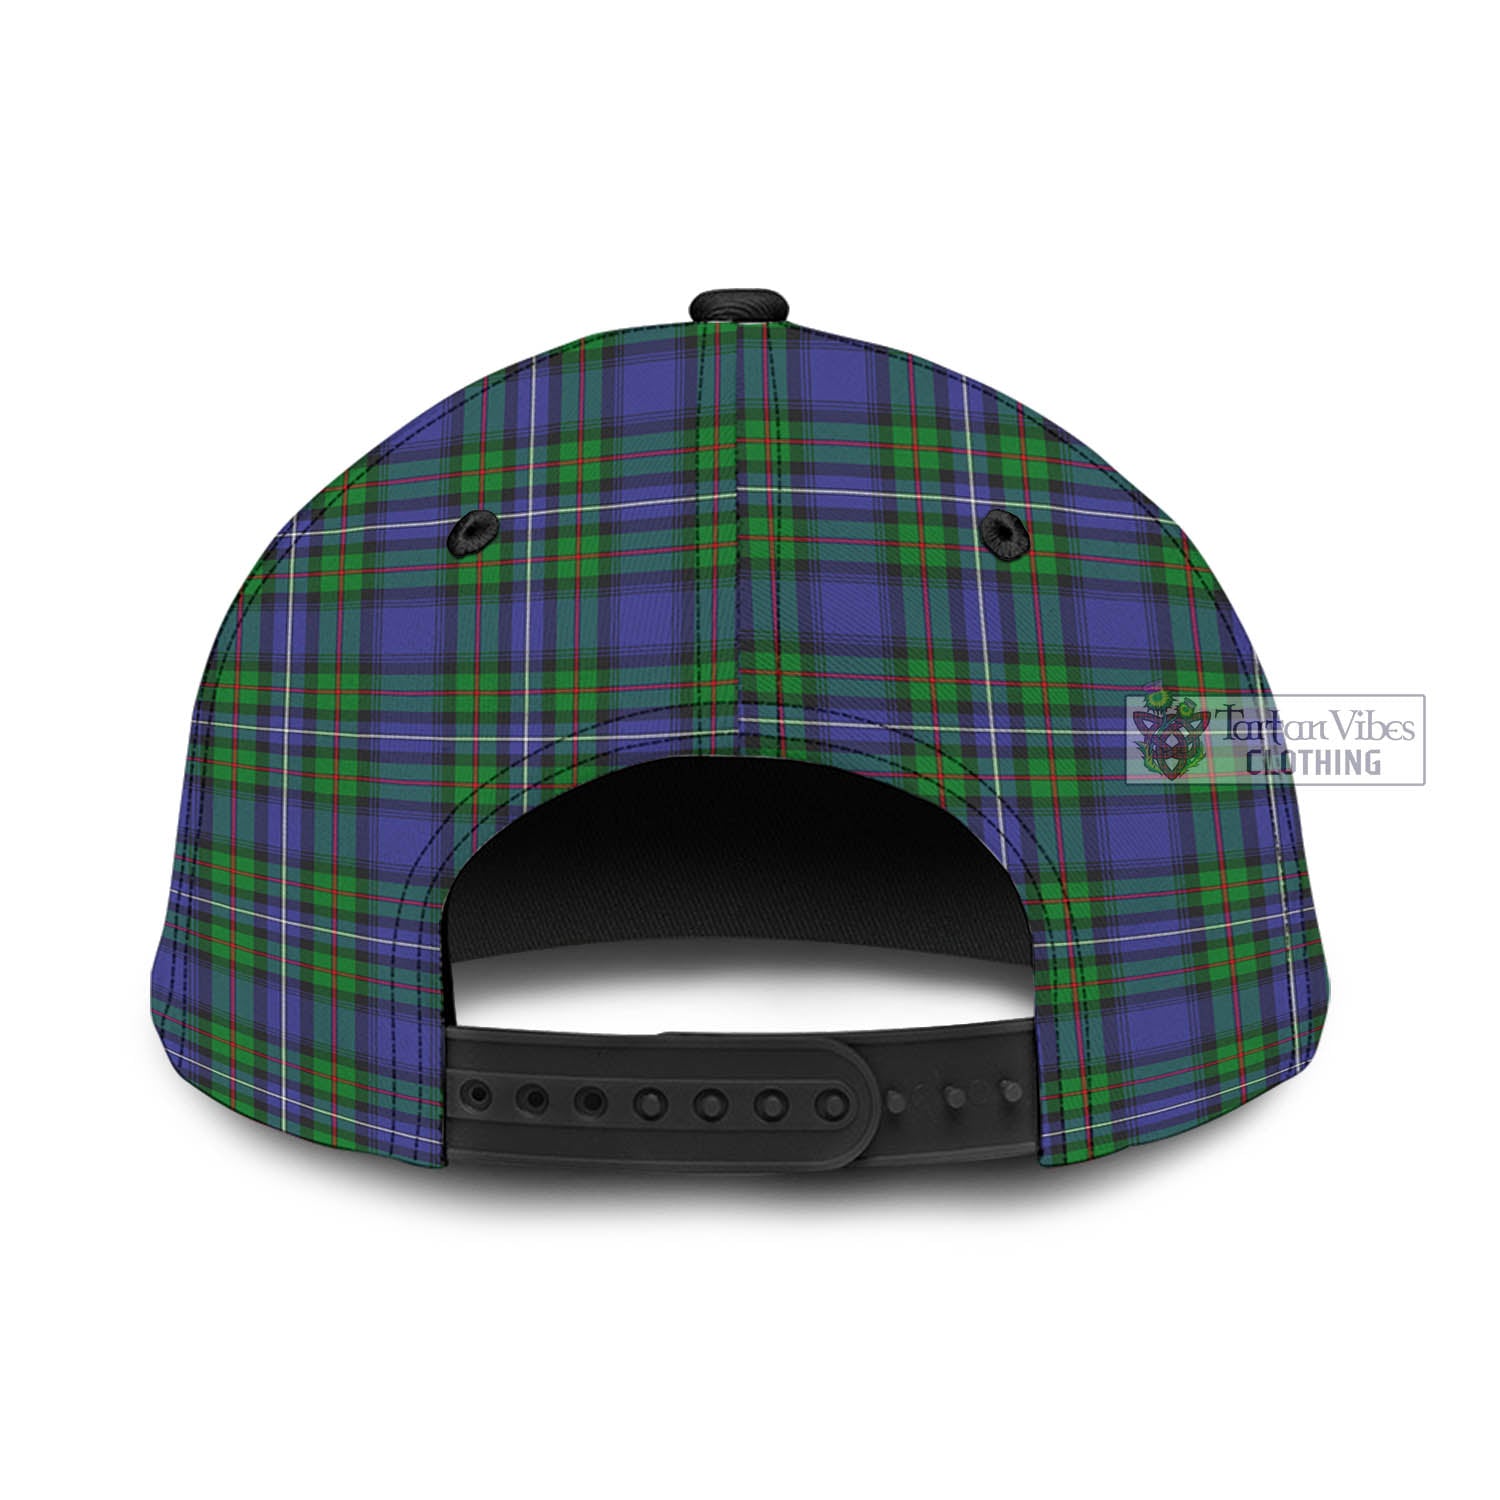 Tartan Vibes Clothing Robertson Hunting Modern Tartan Classic Cap with Family Crest In Me Style